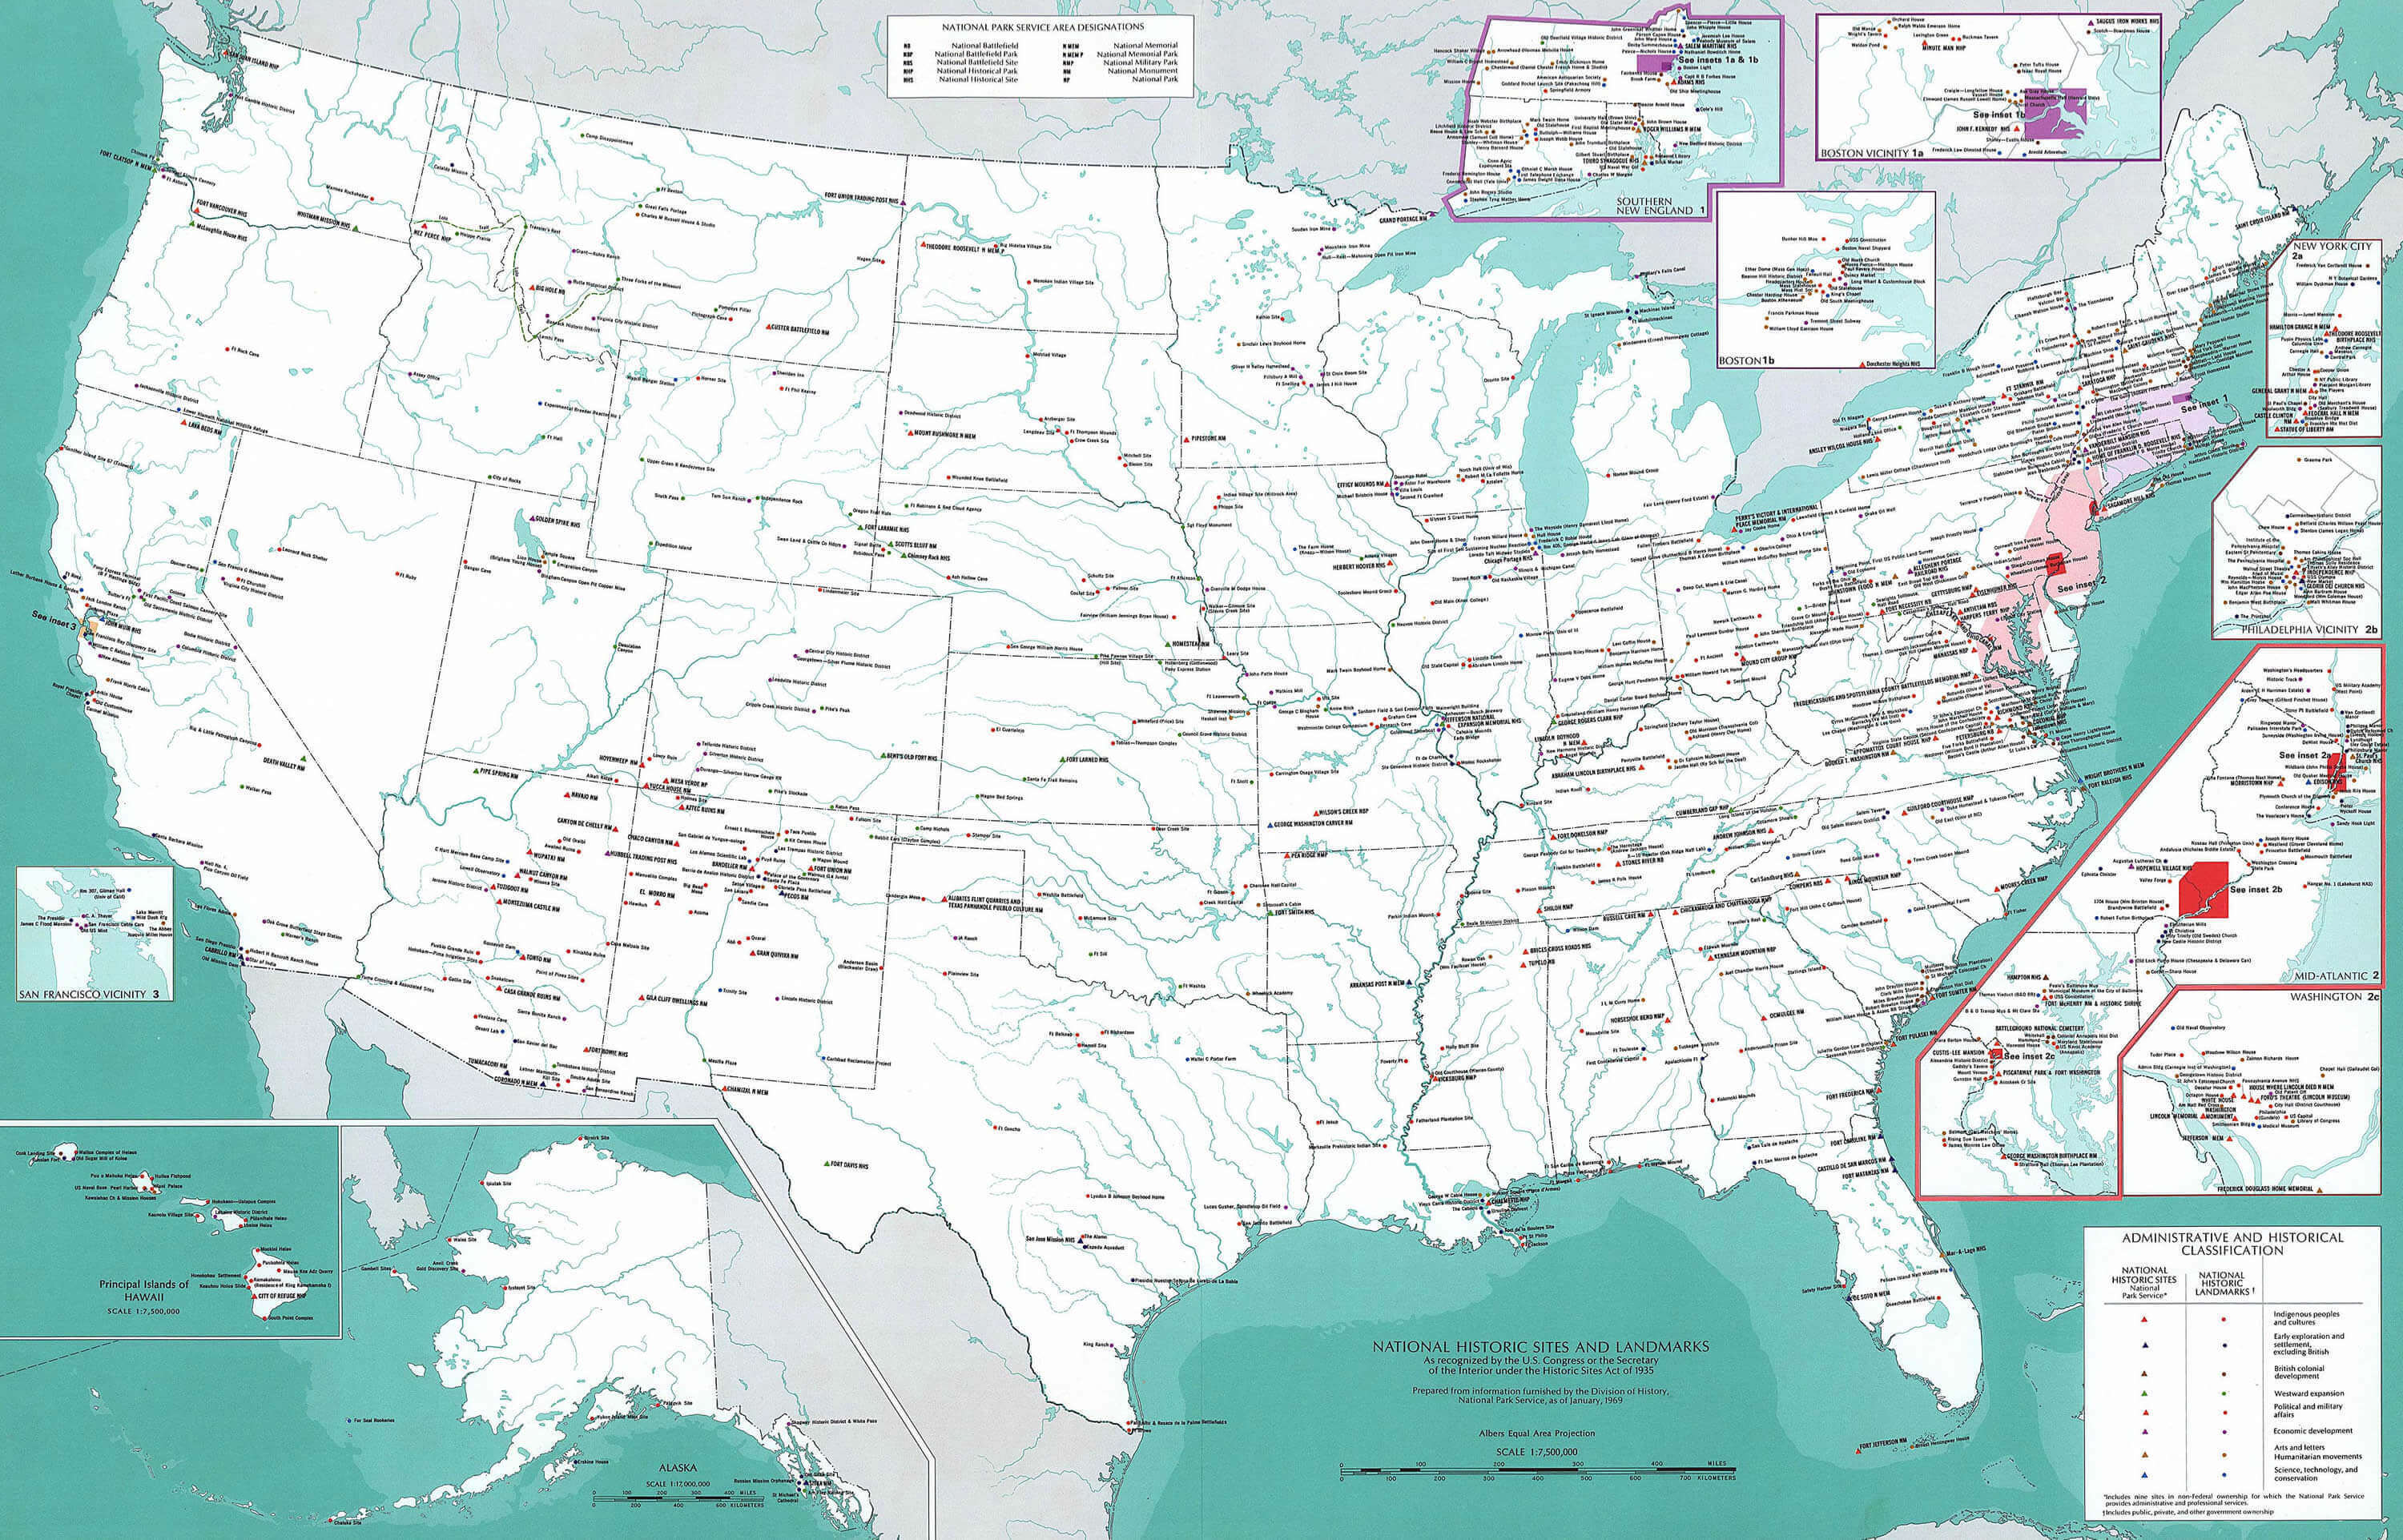 United States Historical Sites Map